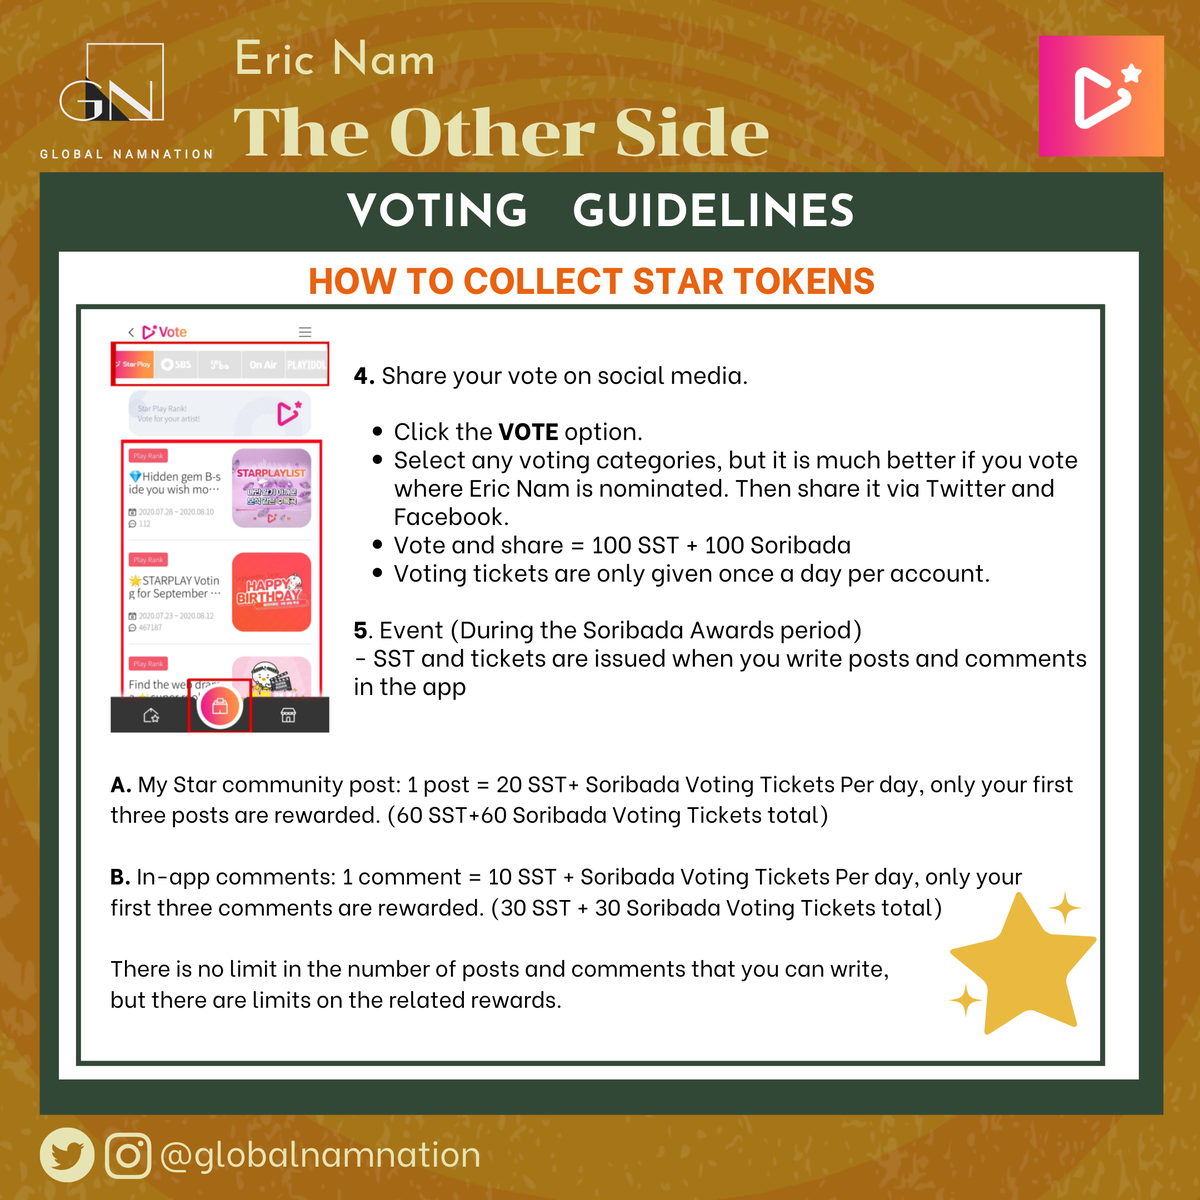 STARPLAY   #VotingGuide (2/3) #EricNamScheduleDon't forget to vote Eric Nam on MWAVE & WHOSFAN for MNet Countdown., and STARPLAY for The Show.(Please see separate guidelines.) #EricNam  #에릭남  #TheOtherSide  #ParadiseWithEricNam  #DownForEricNam